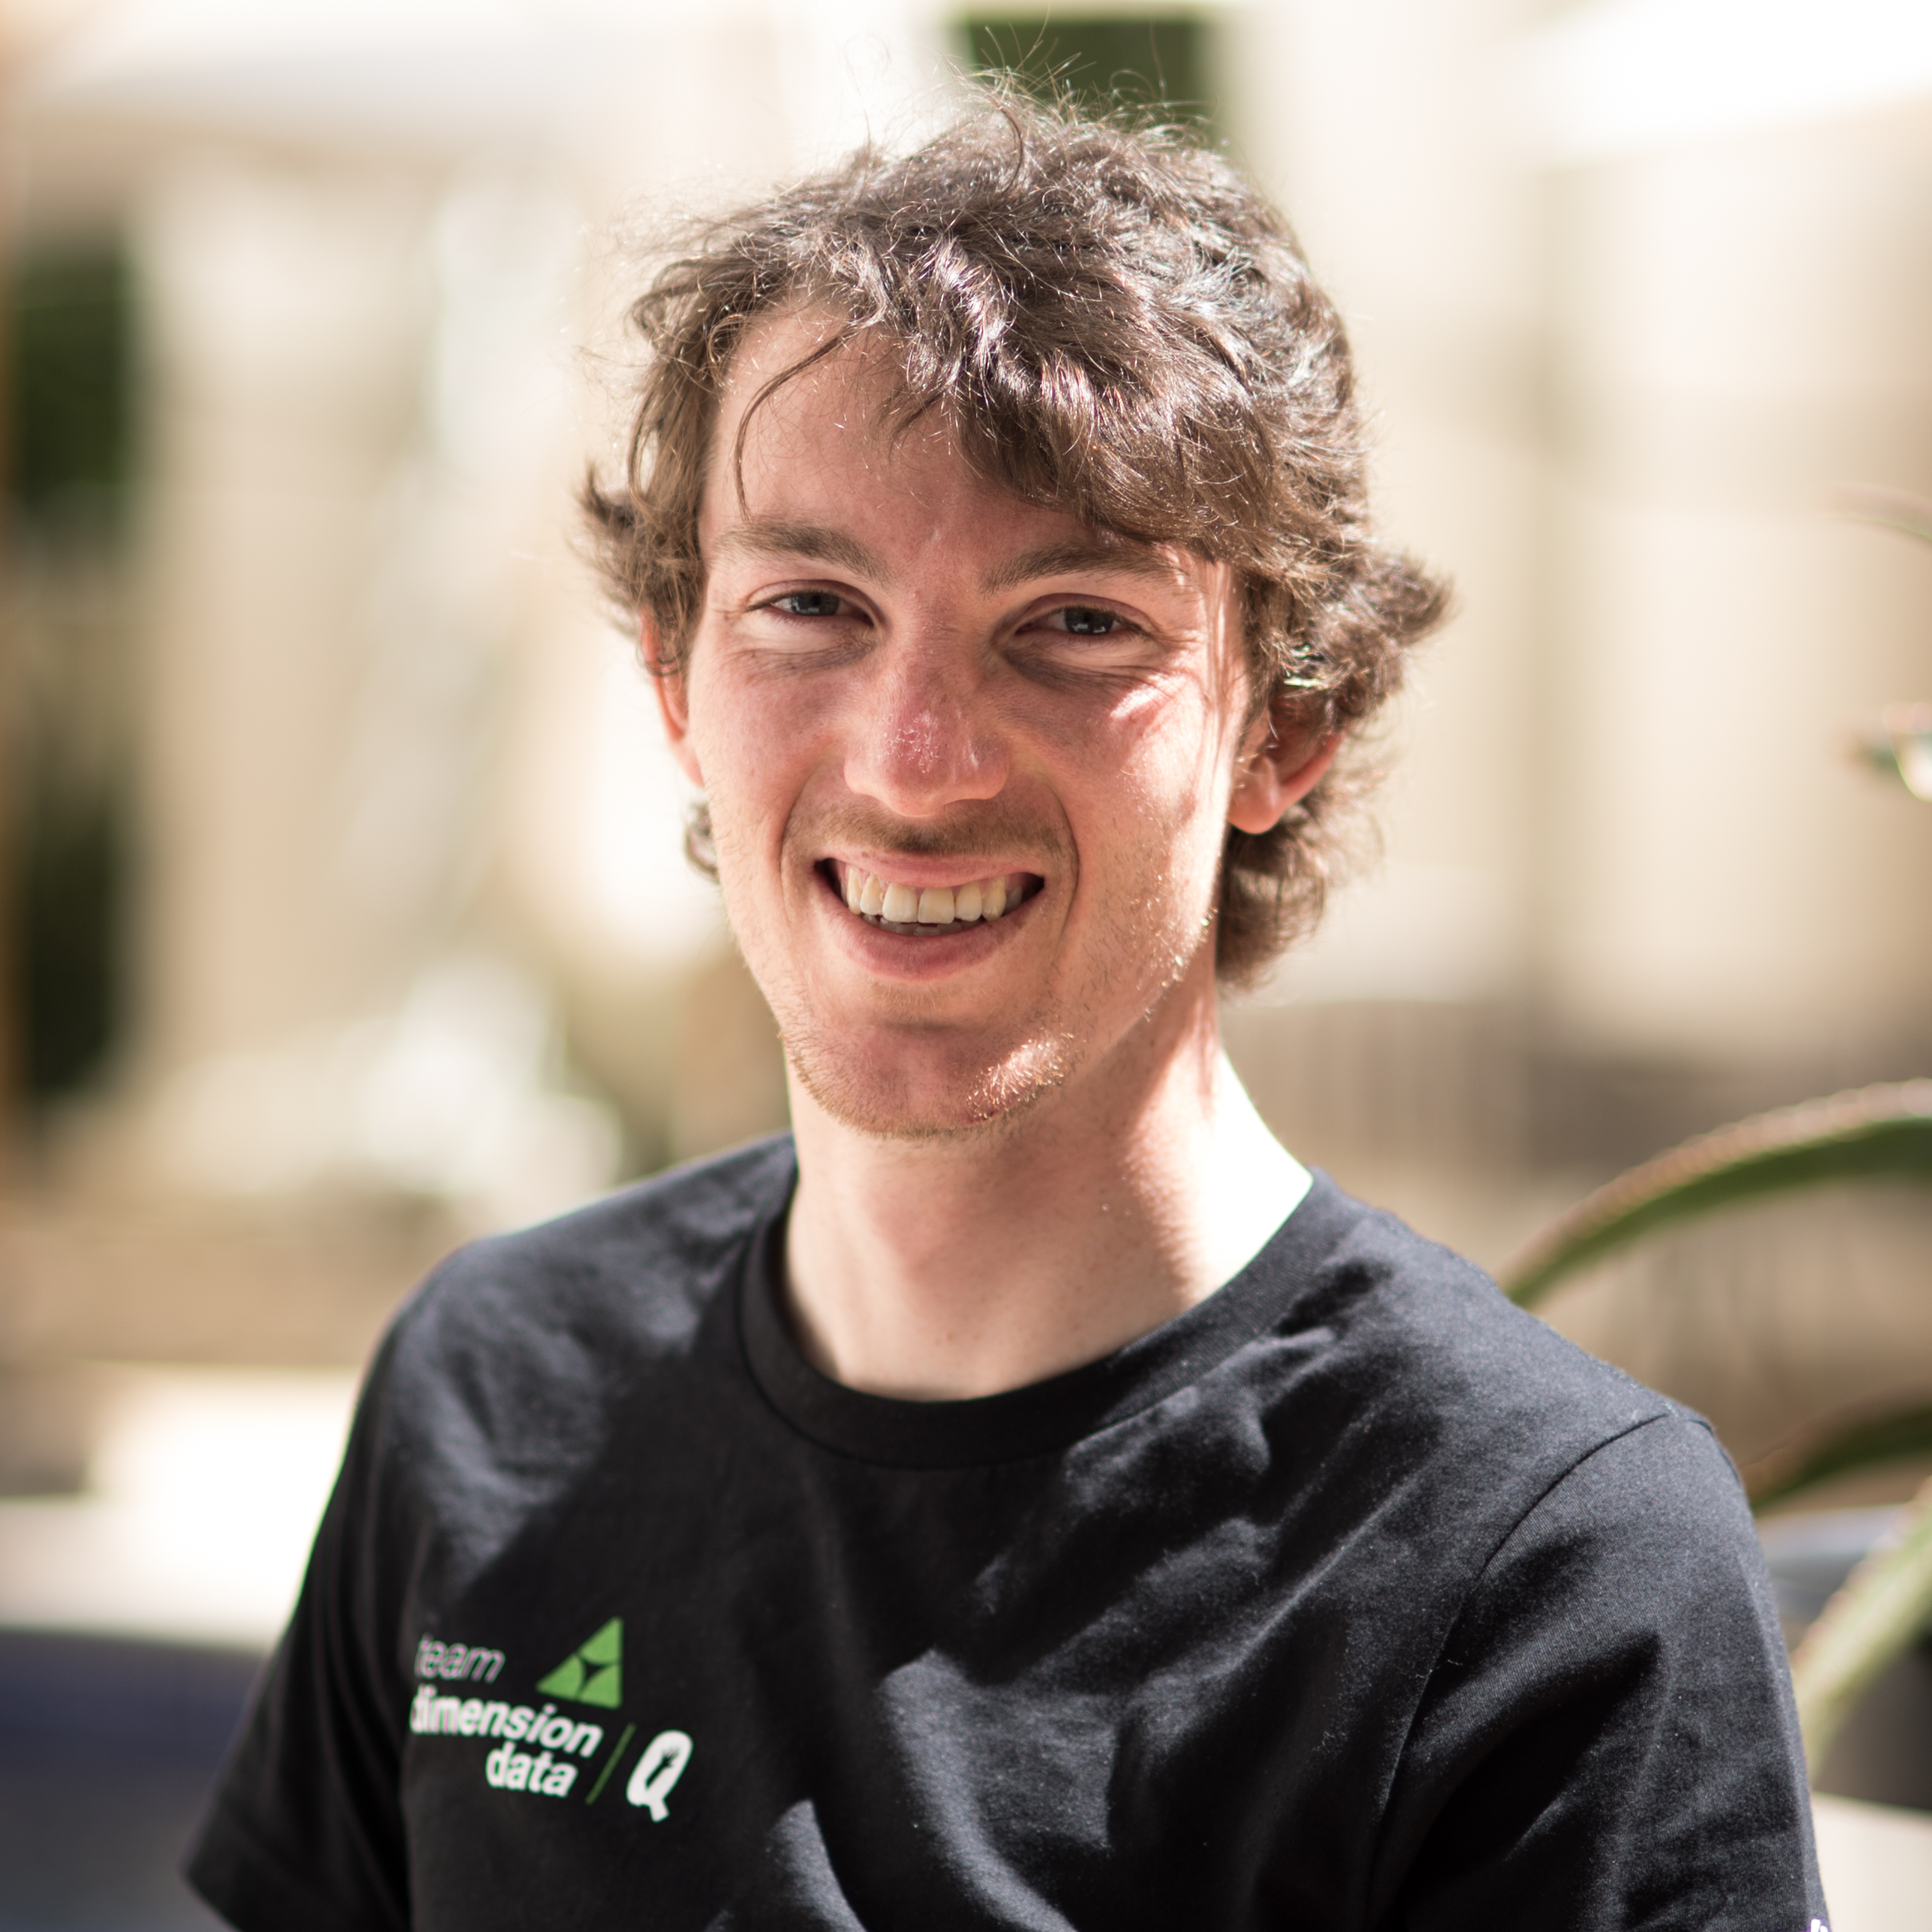 From Virtual Reality to Pro: Ollie Jones wins Zwift Academy for Team Dimension Data U23